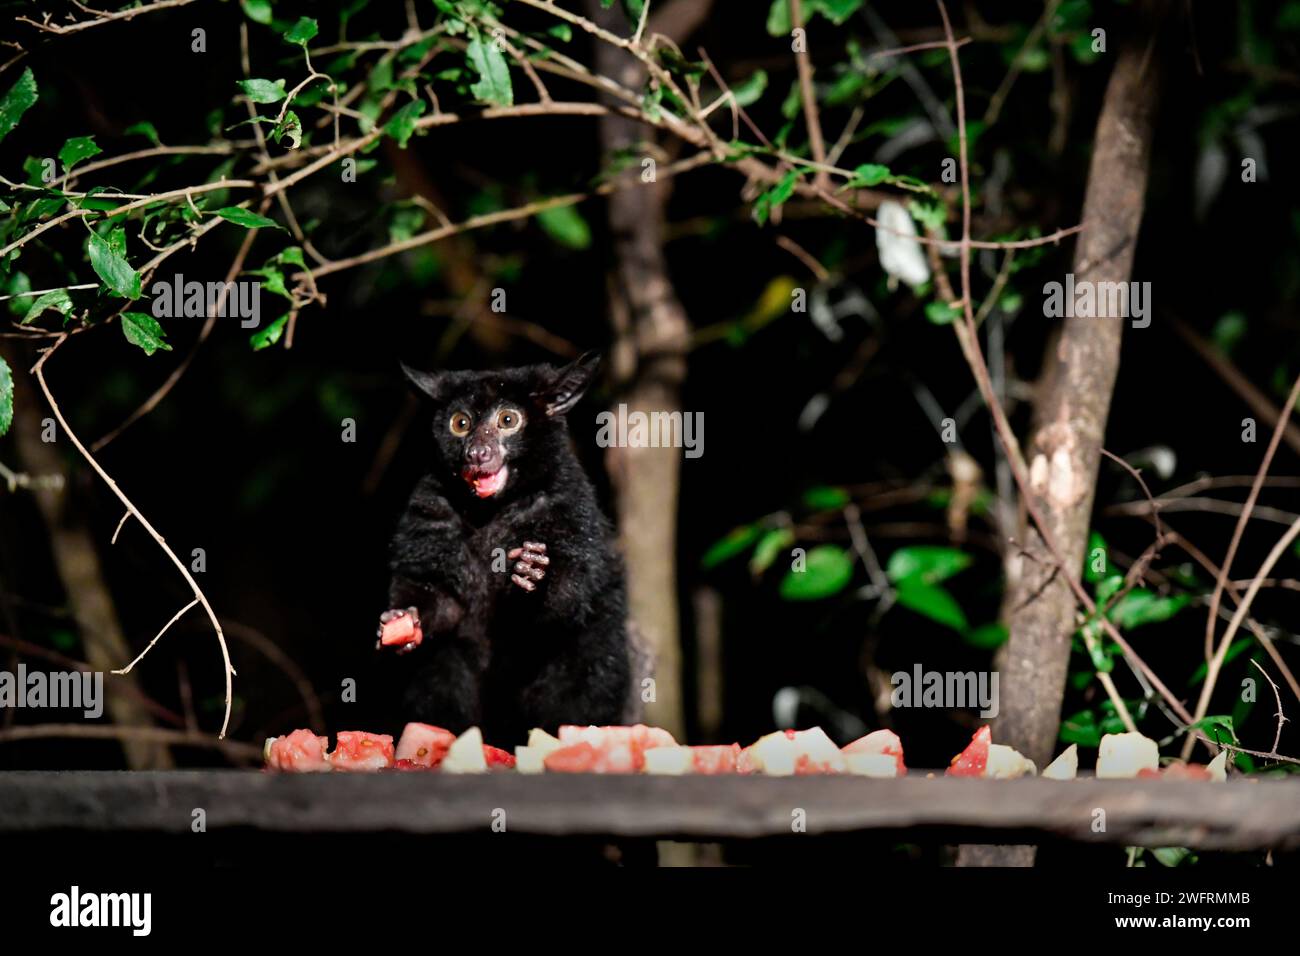 Bush baby in the night of Africa Stock Photo